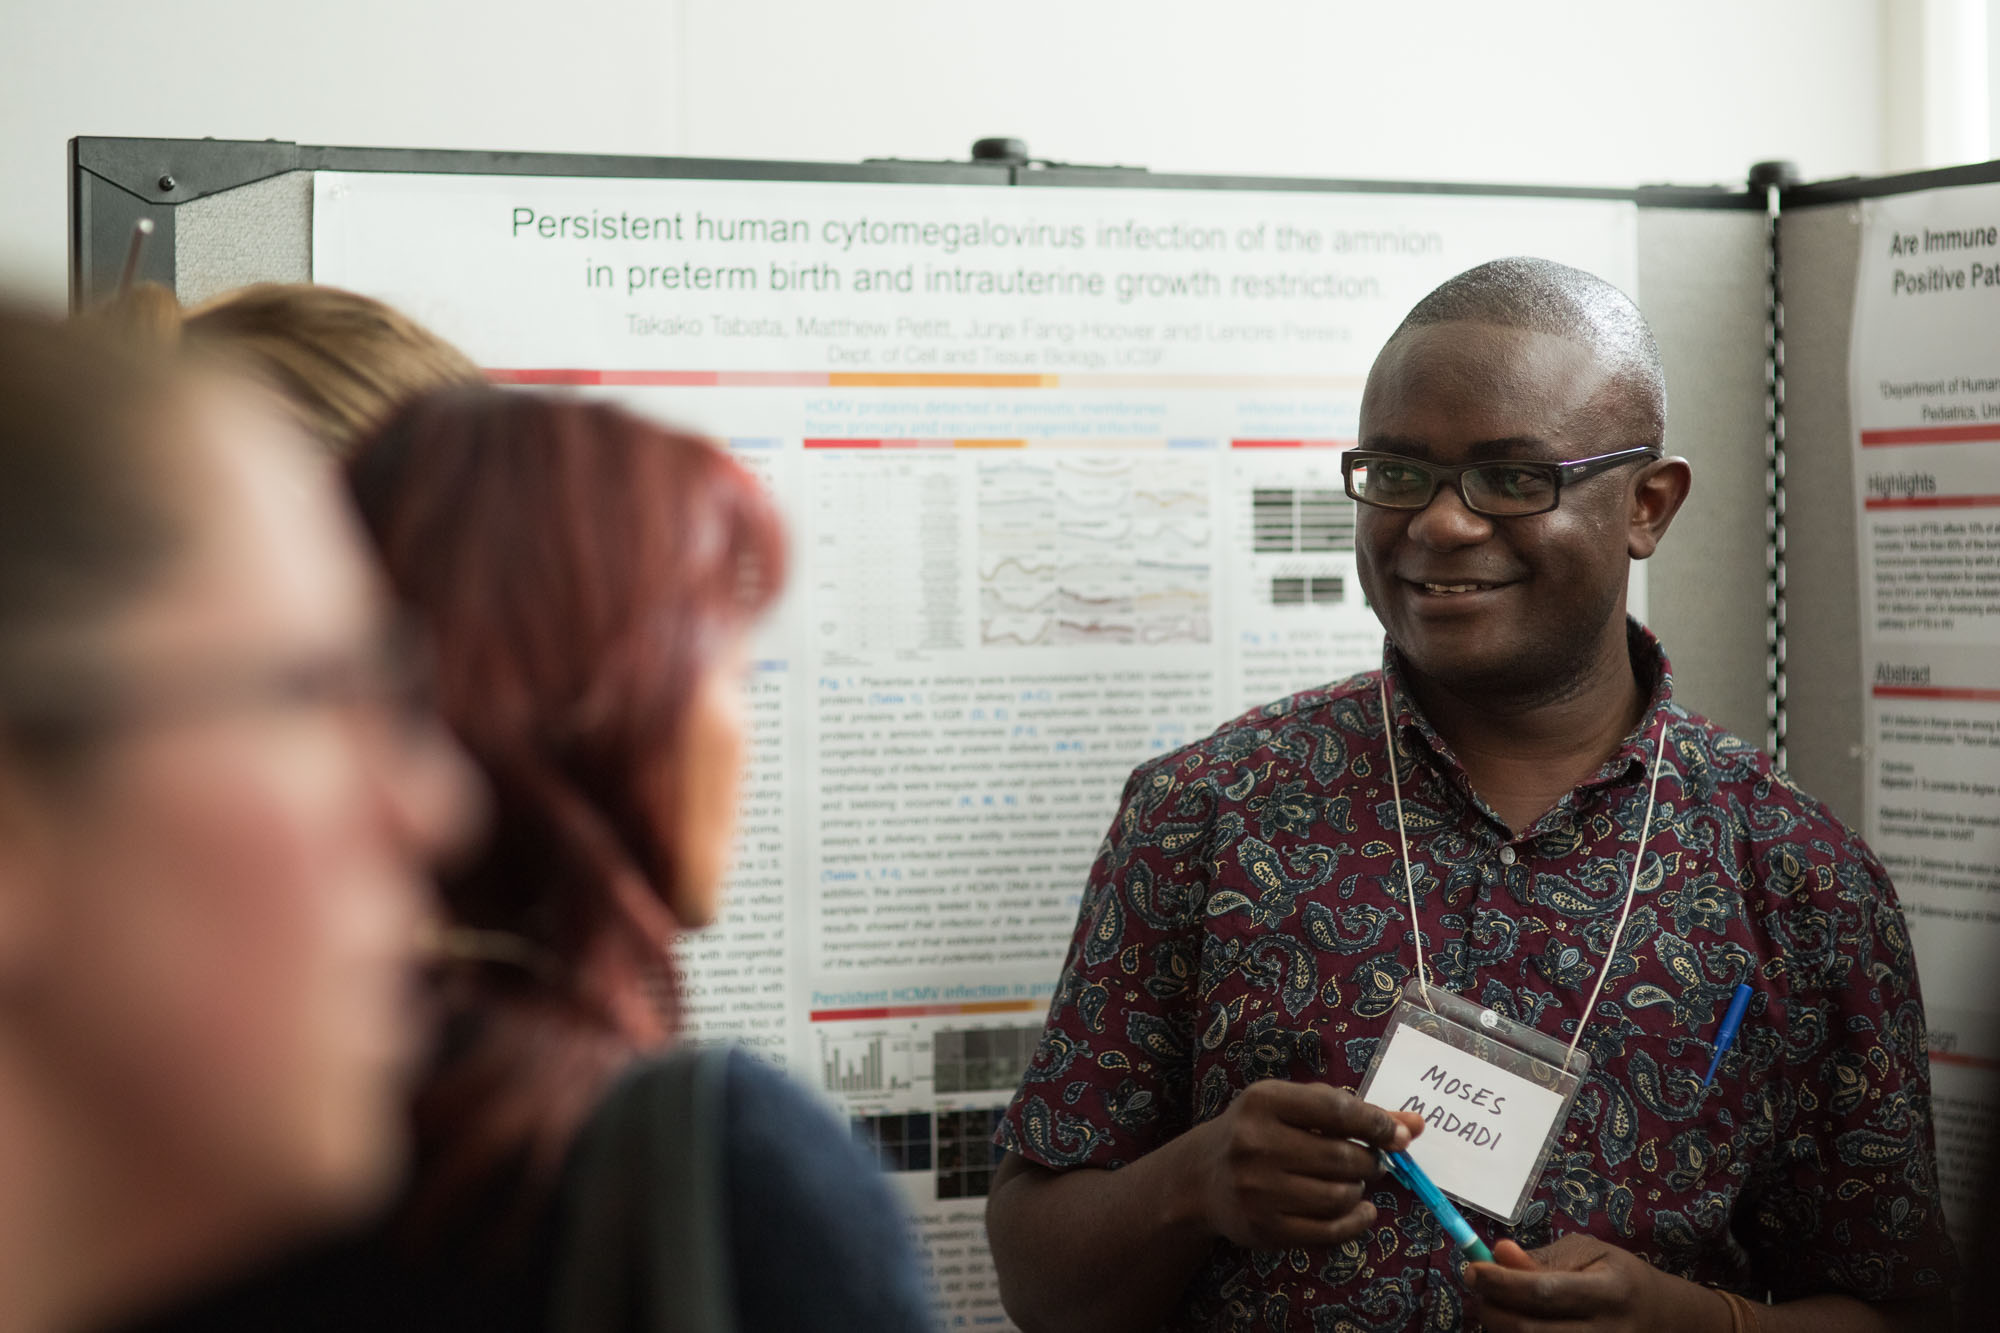 Researchers explaining his poster at the symposium poster session